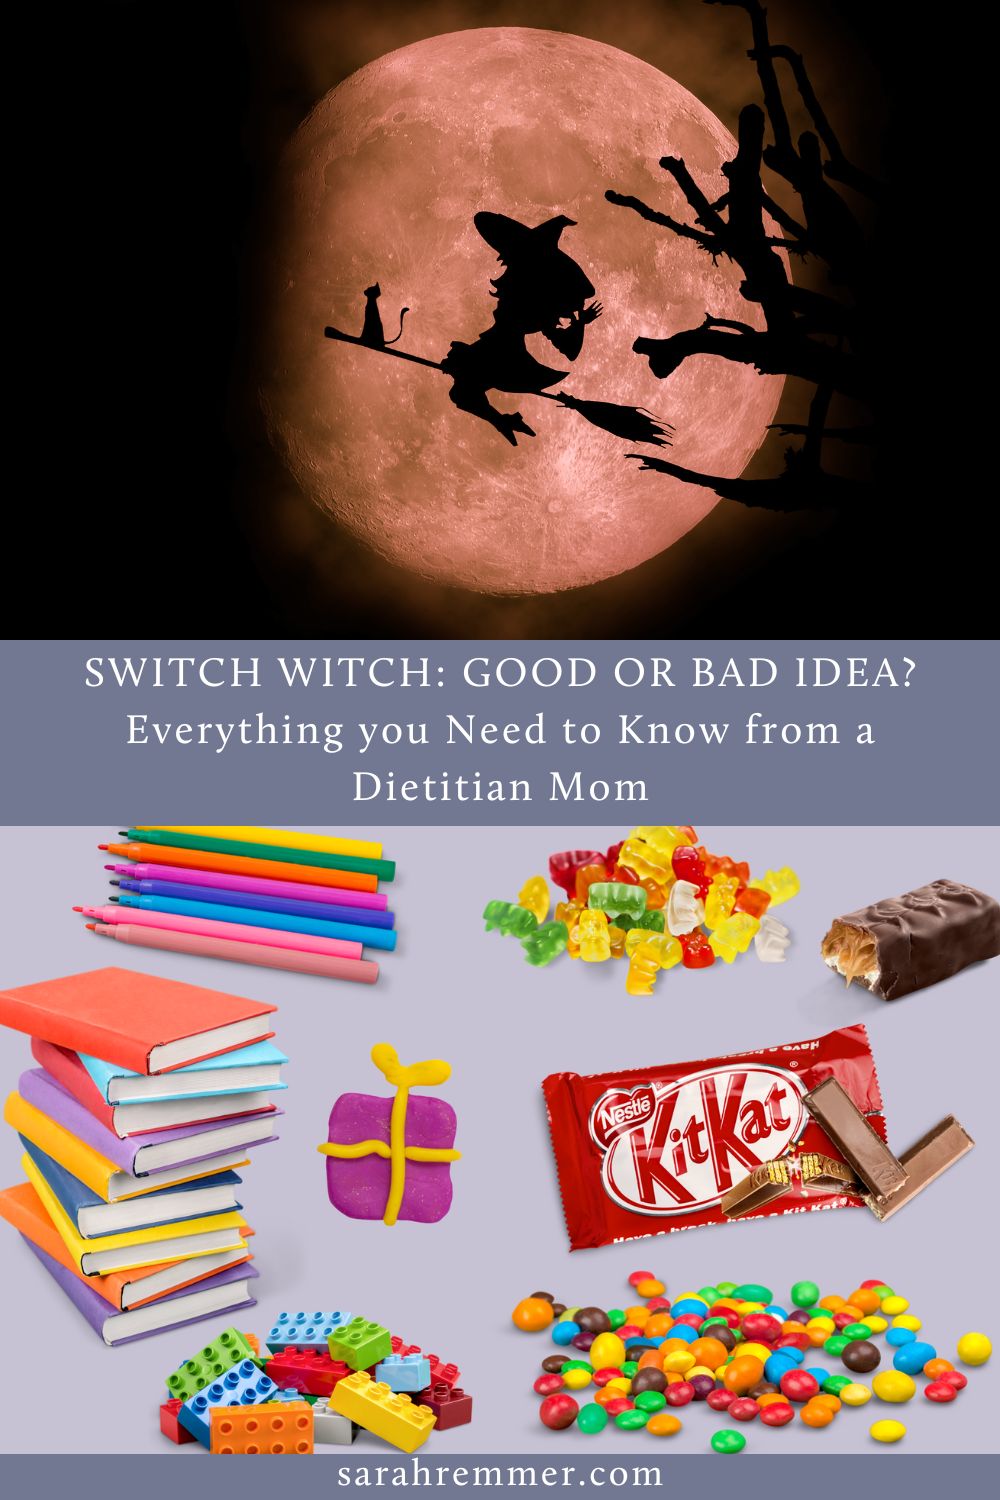 Should you use the Switch Witch method with your kids' candy? Here are the pros and cons this dietitian mom wants you to know about this Halloween tradition.